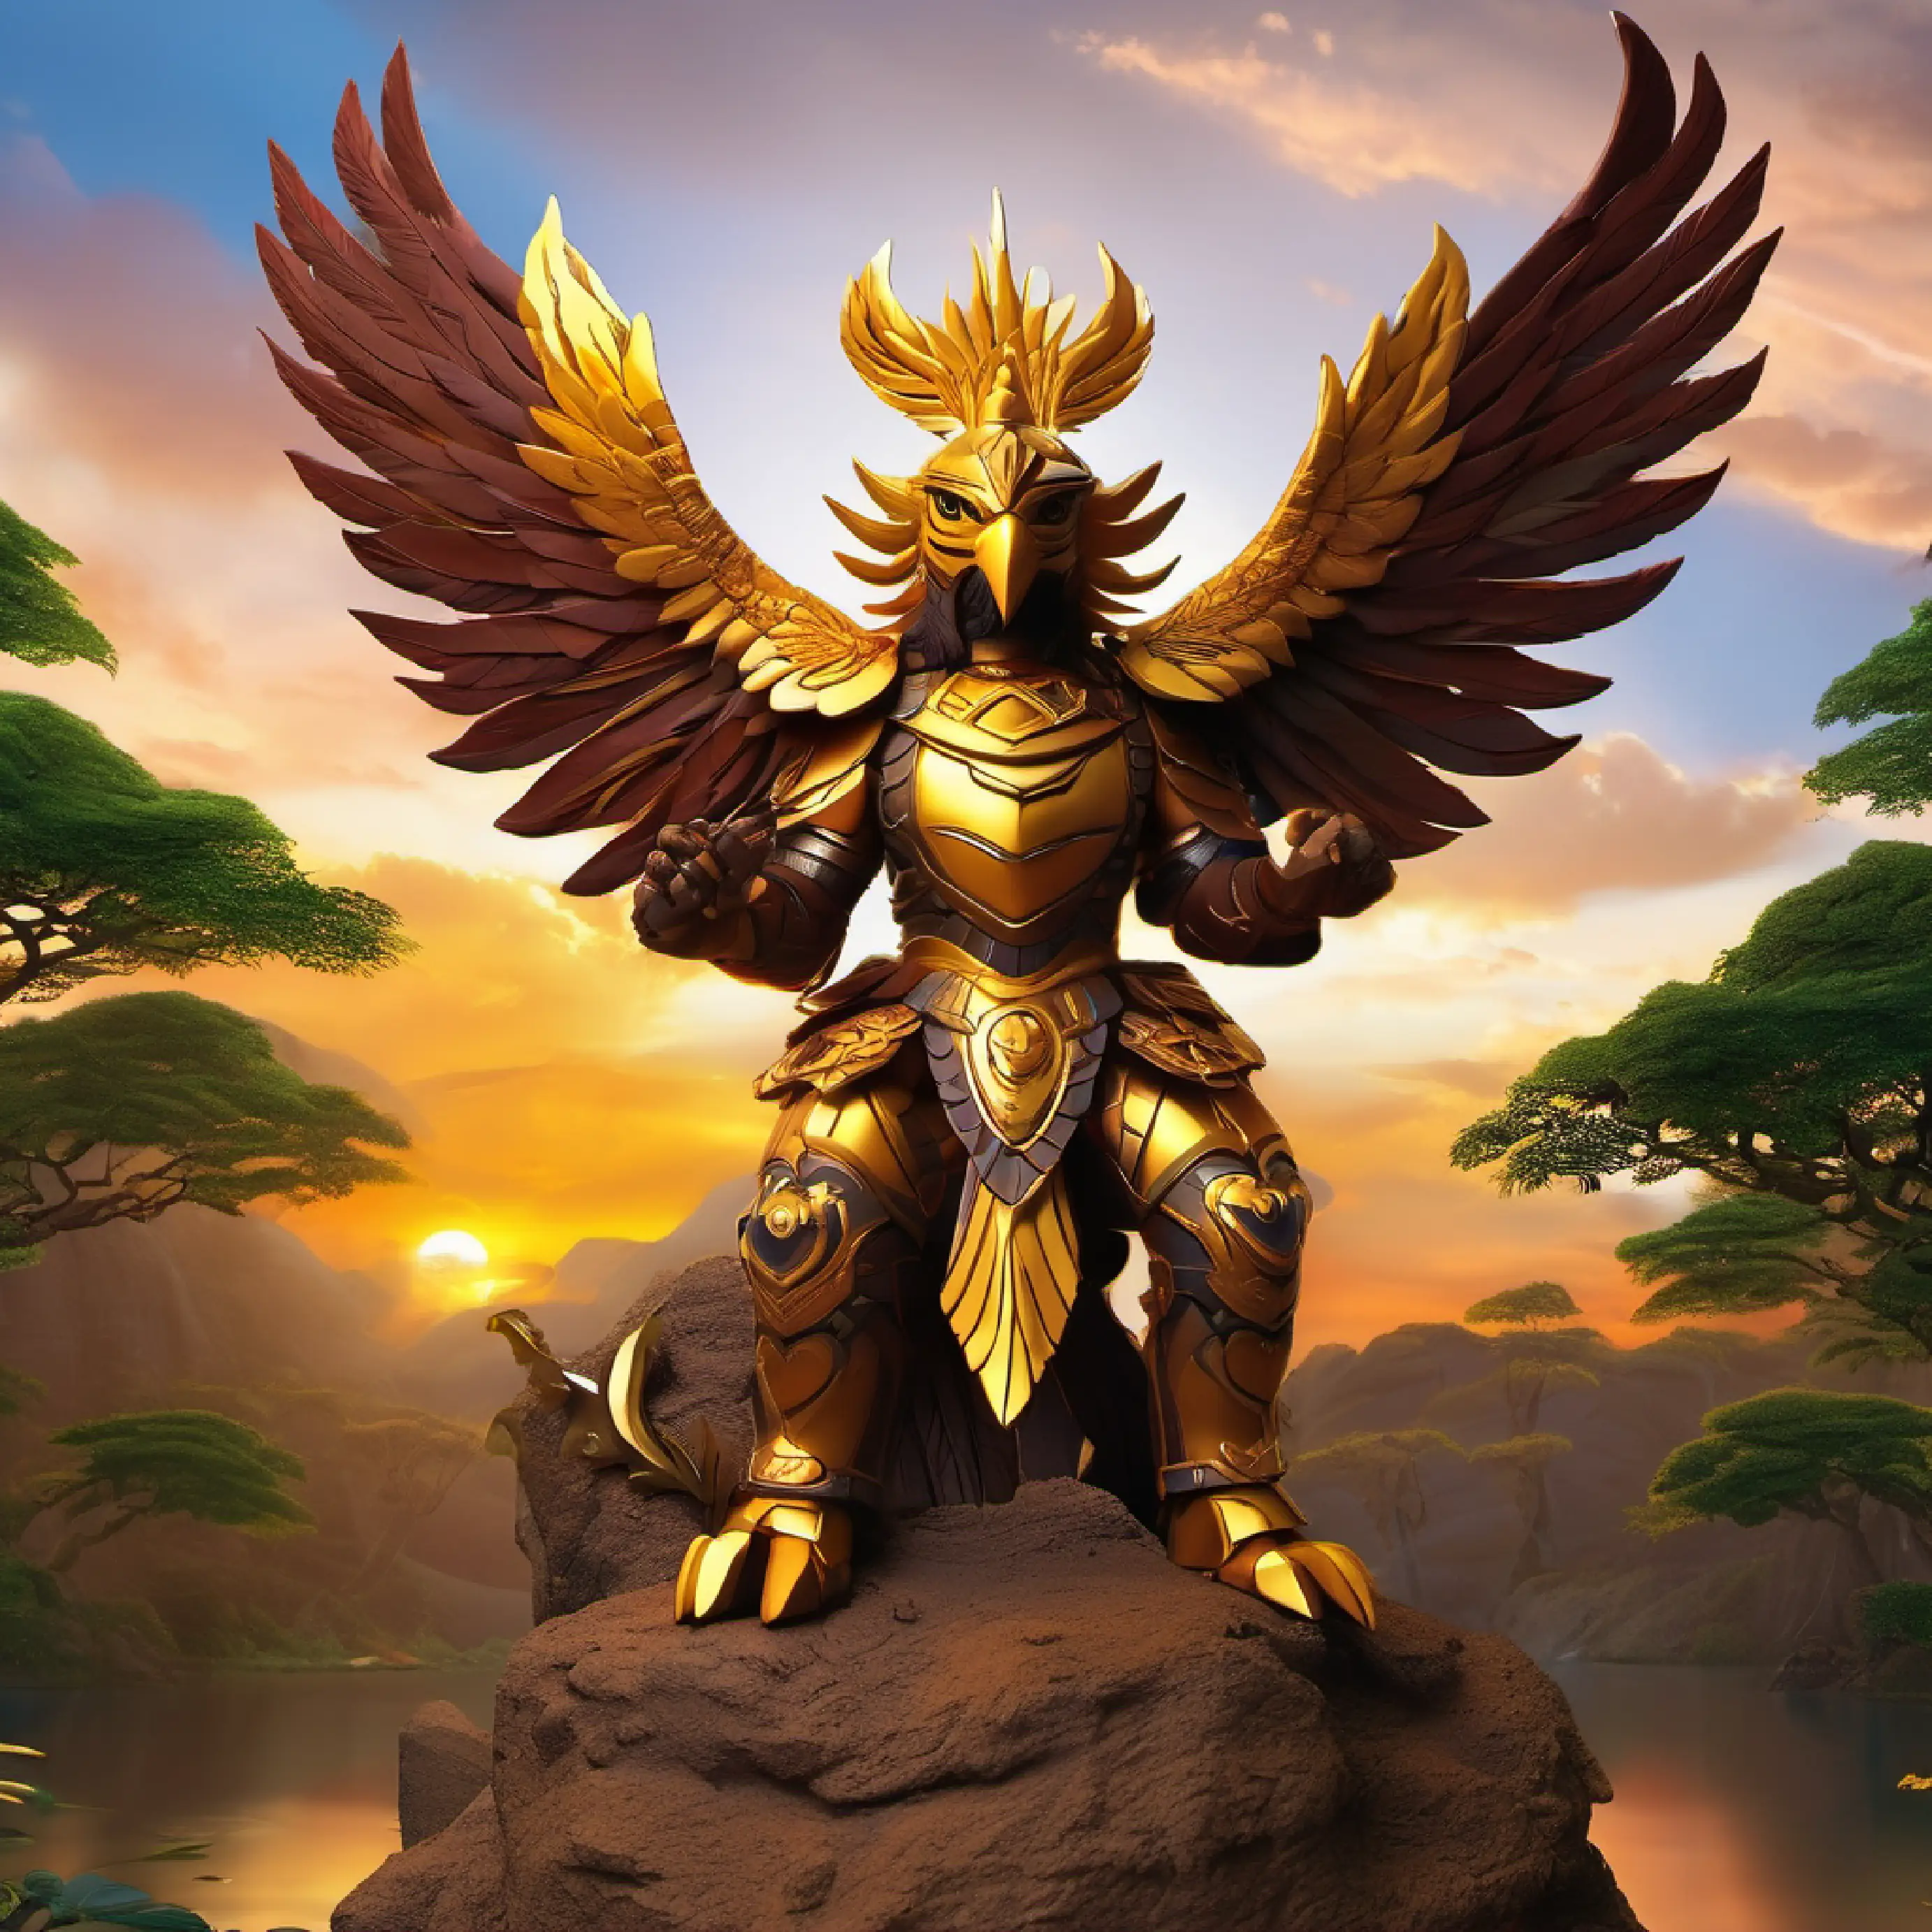 "Picture Garuda, fierce and resolute, his golden armor reflecting the fiery hues of the setting sun. His helmet, shaped like an eagle's head with eyes aglow, strikes fear into the hearts of his enemies. In the dense jungles of the mythical Naga realm, he engages in a titanic battle against the serpent kings, 